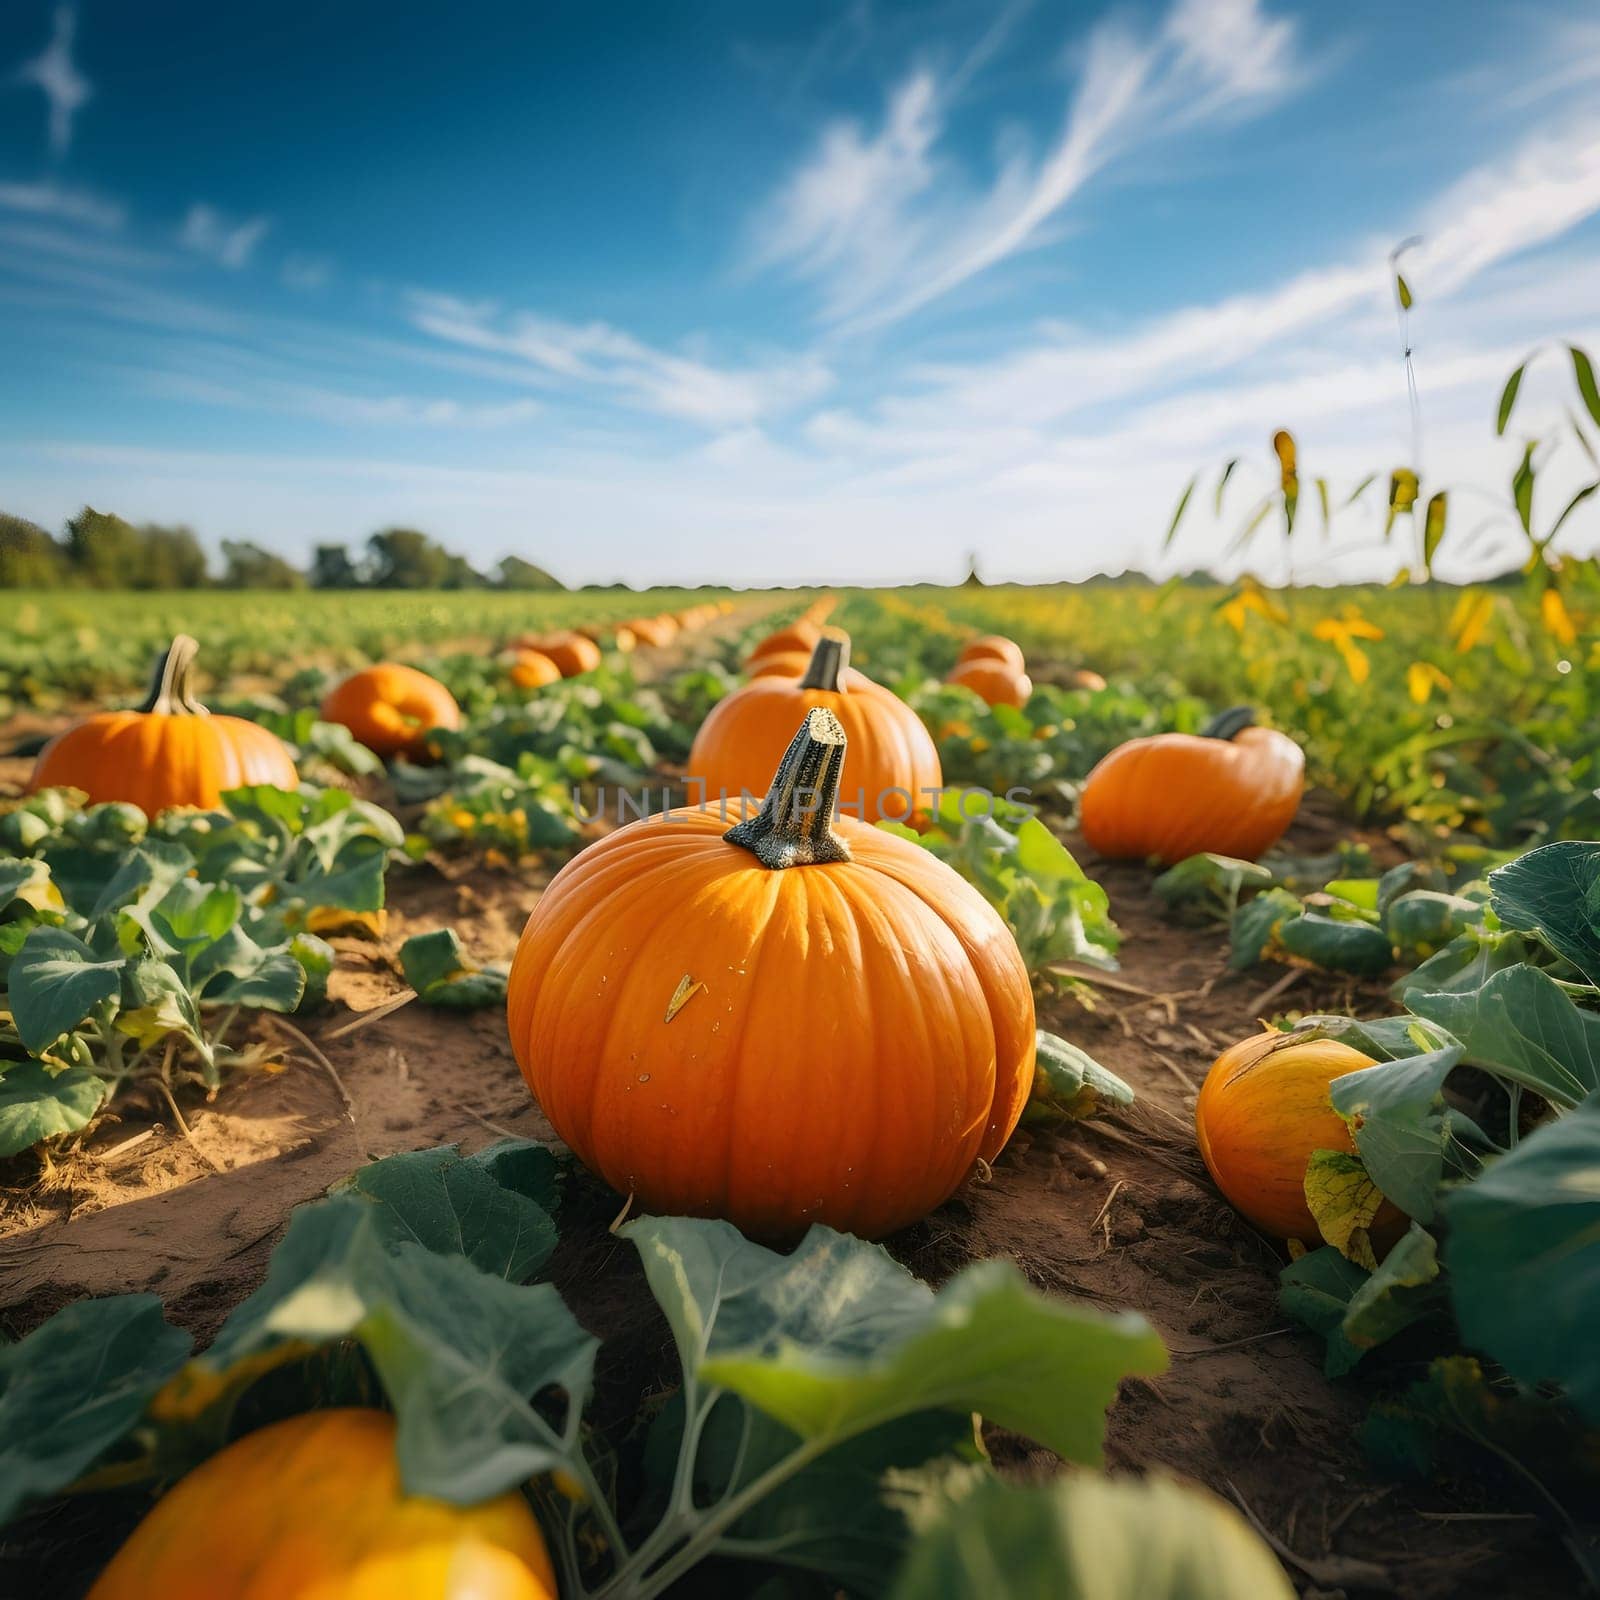 Orange pumpkins in the field during the day. Pumpkin as a dish of thanksgiving for the harvest. The atmosphere of joy and celebration.